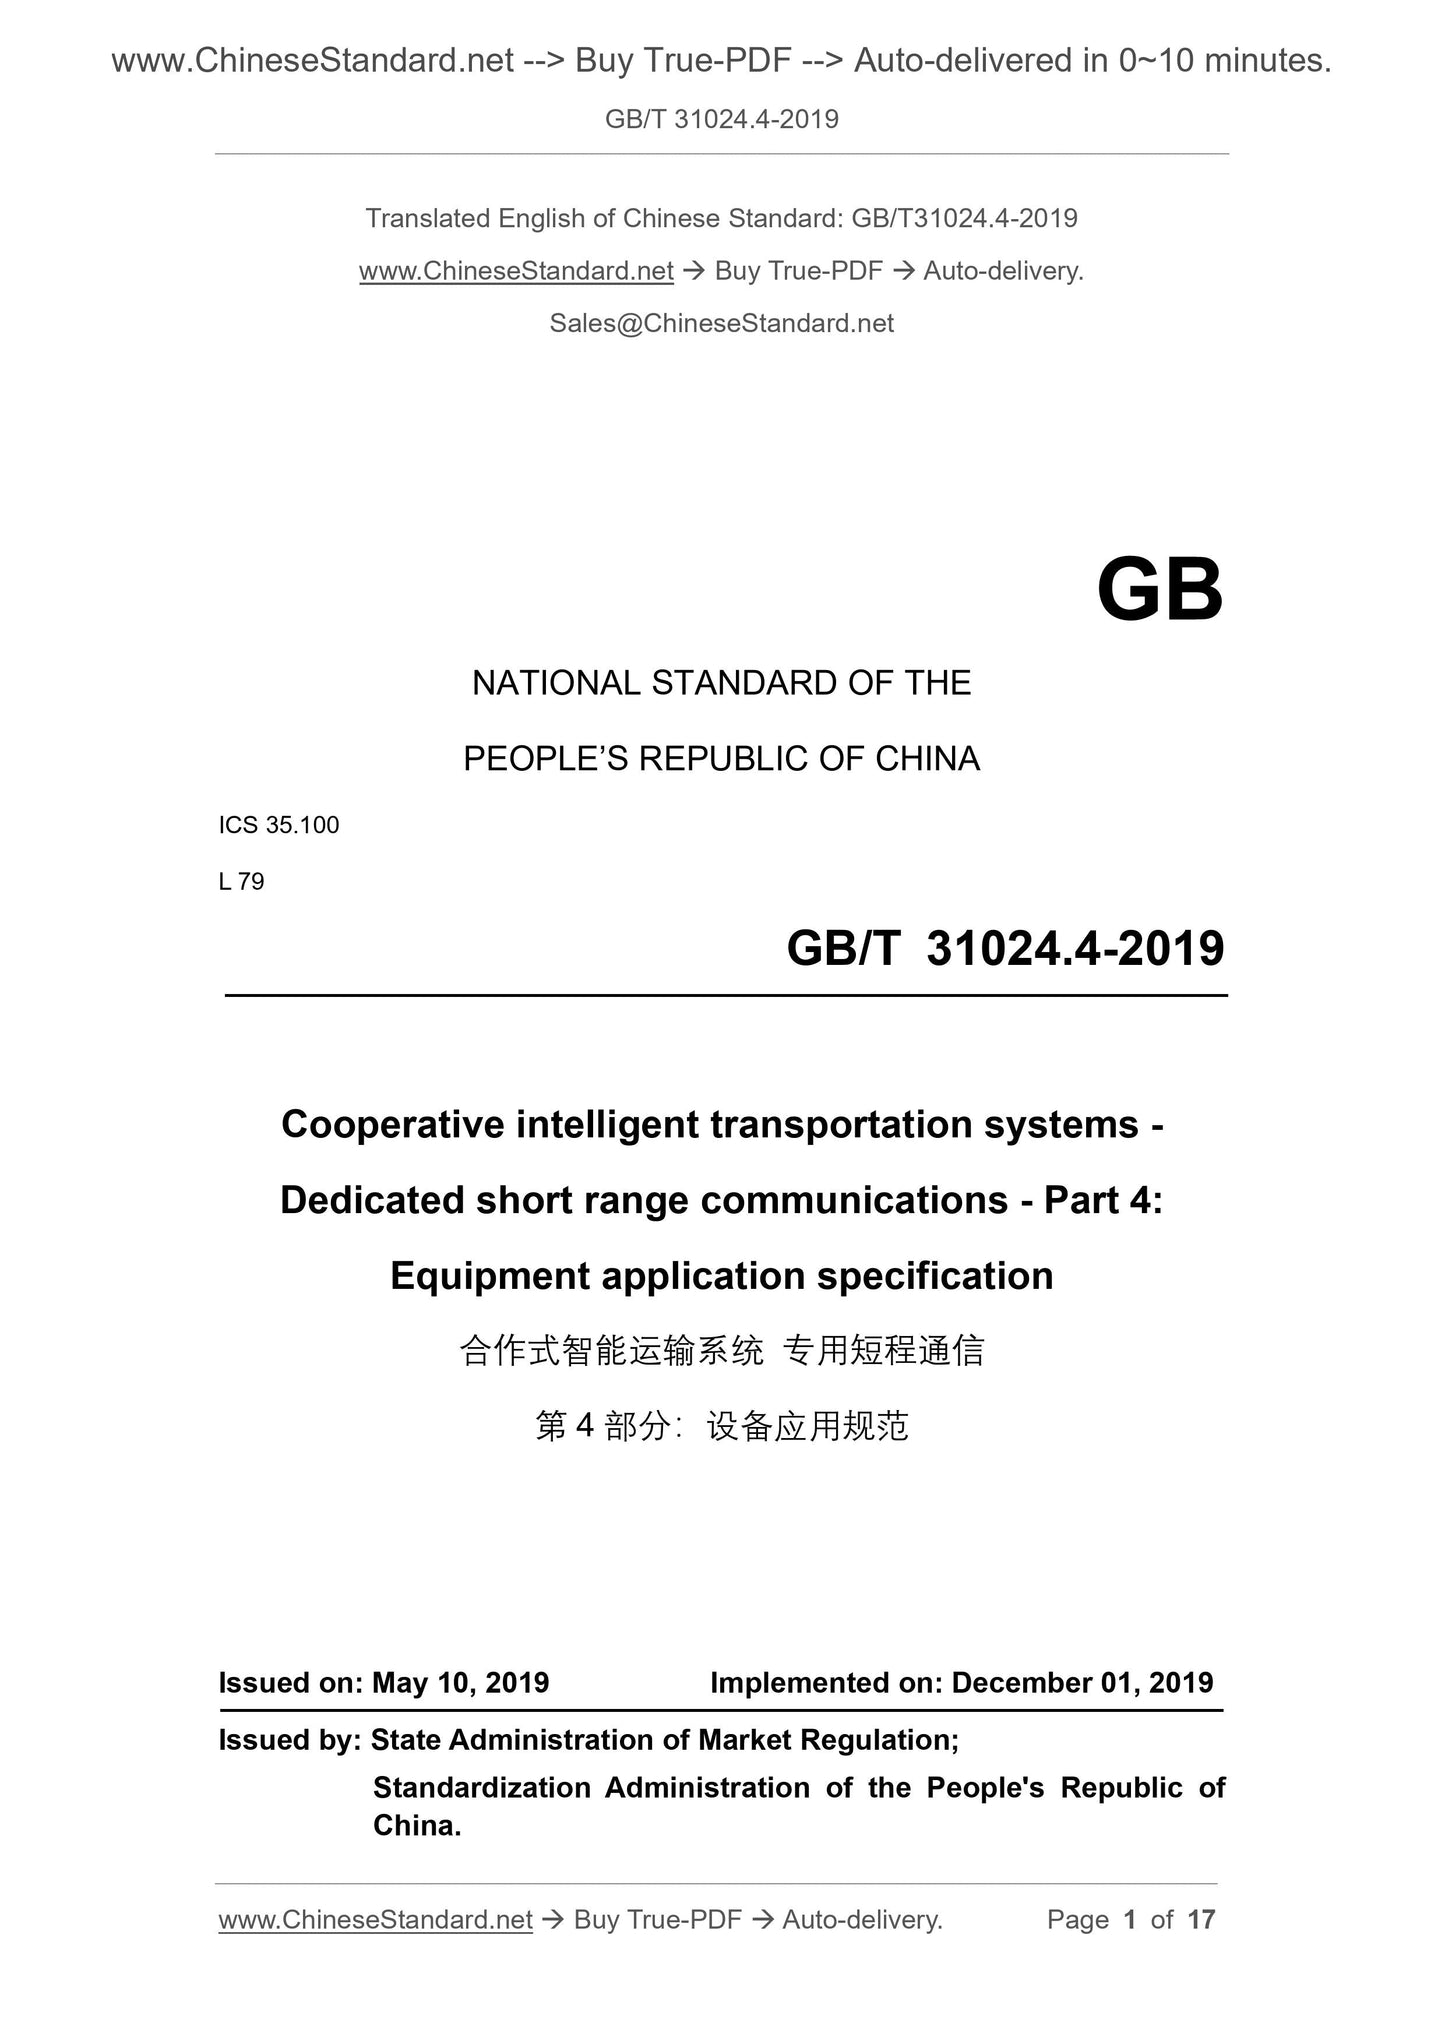 GB/T 31024.4-2019 Page 1